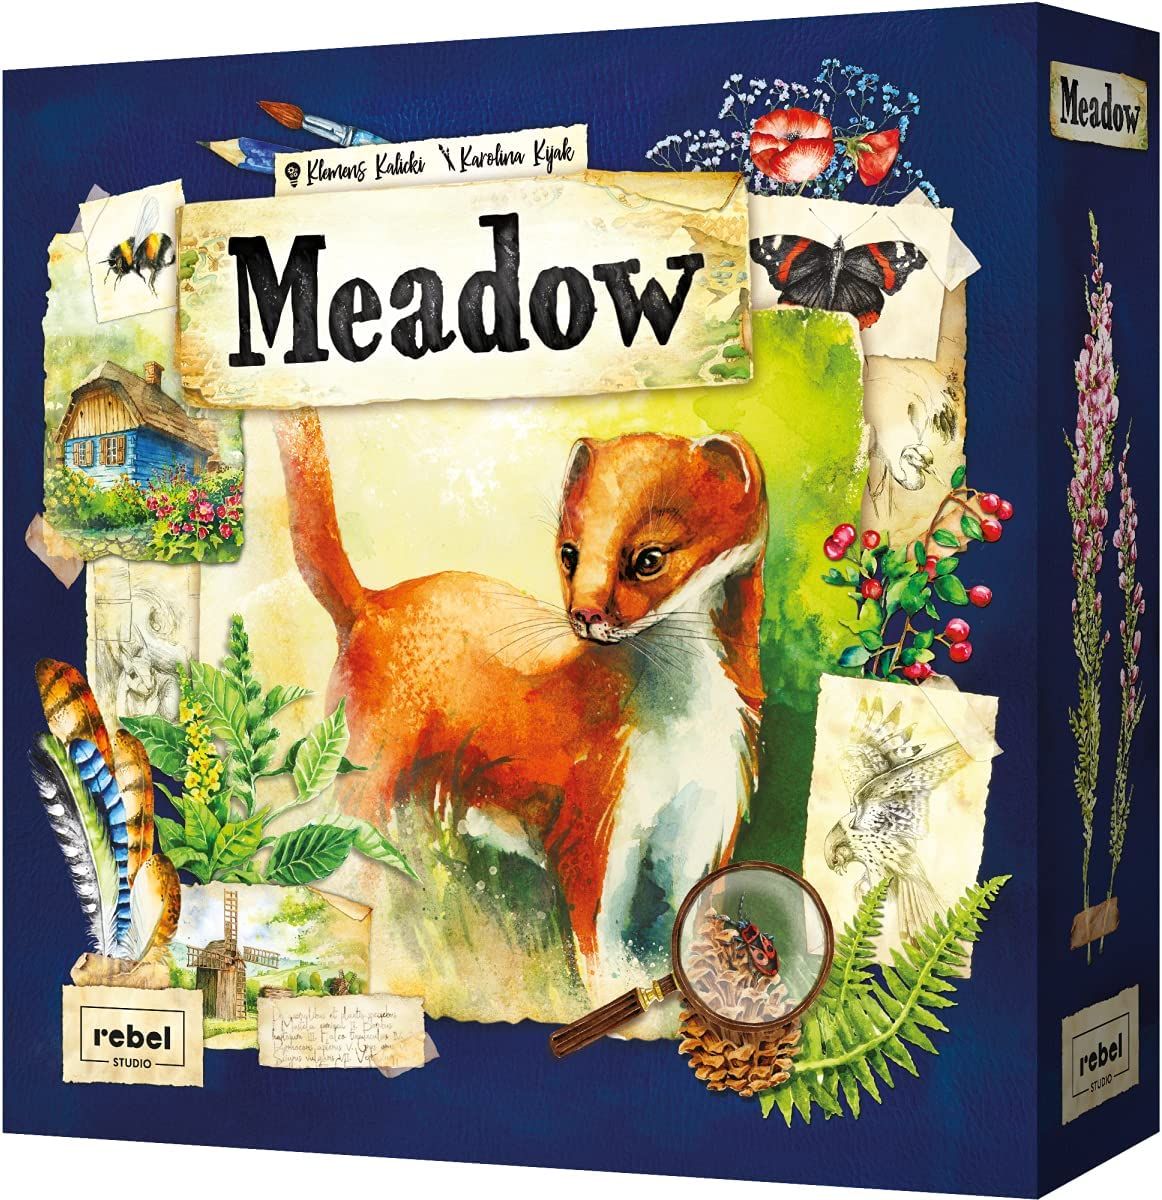 Meadow is one of the most beautiful board games for kids